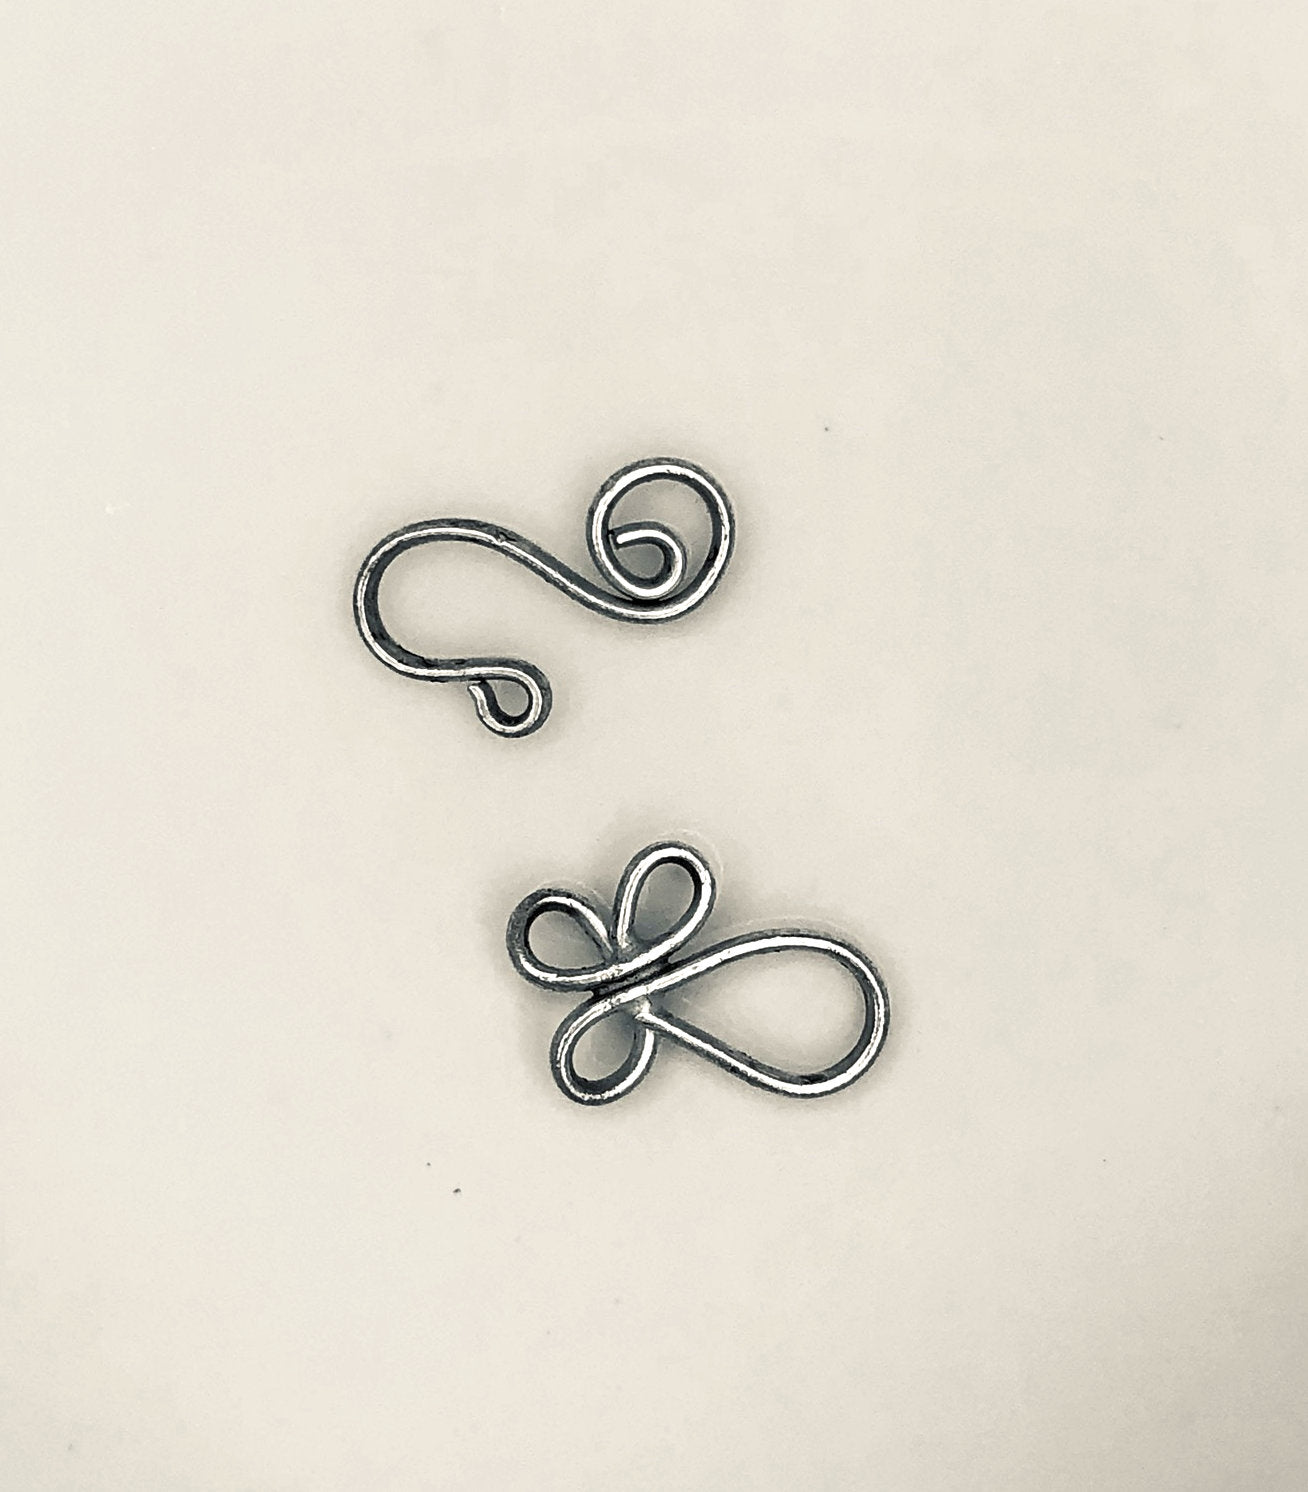 Antique Silver Plated Swirly Hook and Eye Clasp, 8 x 22 mm